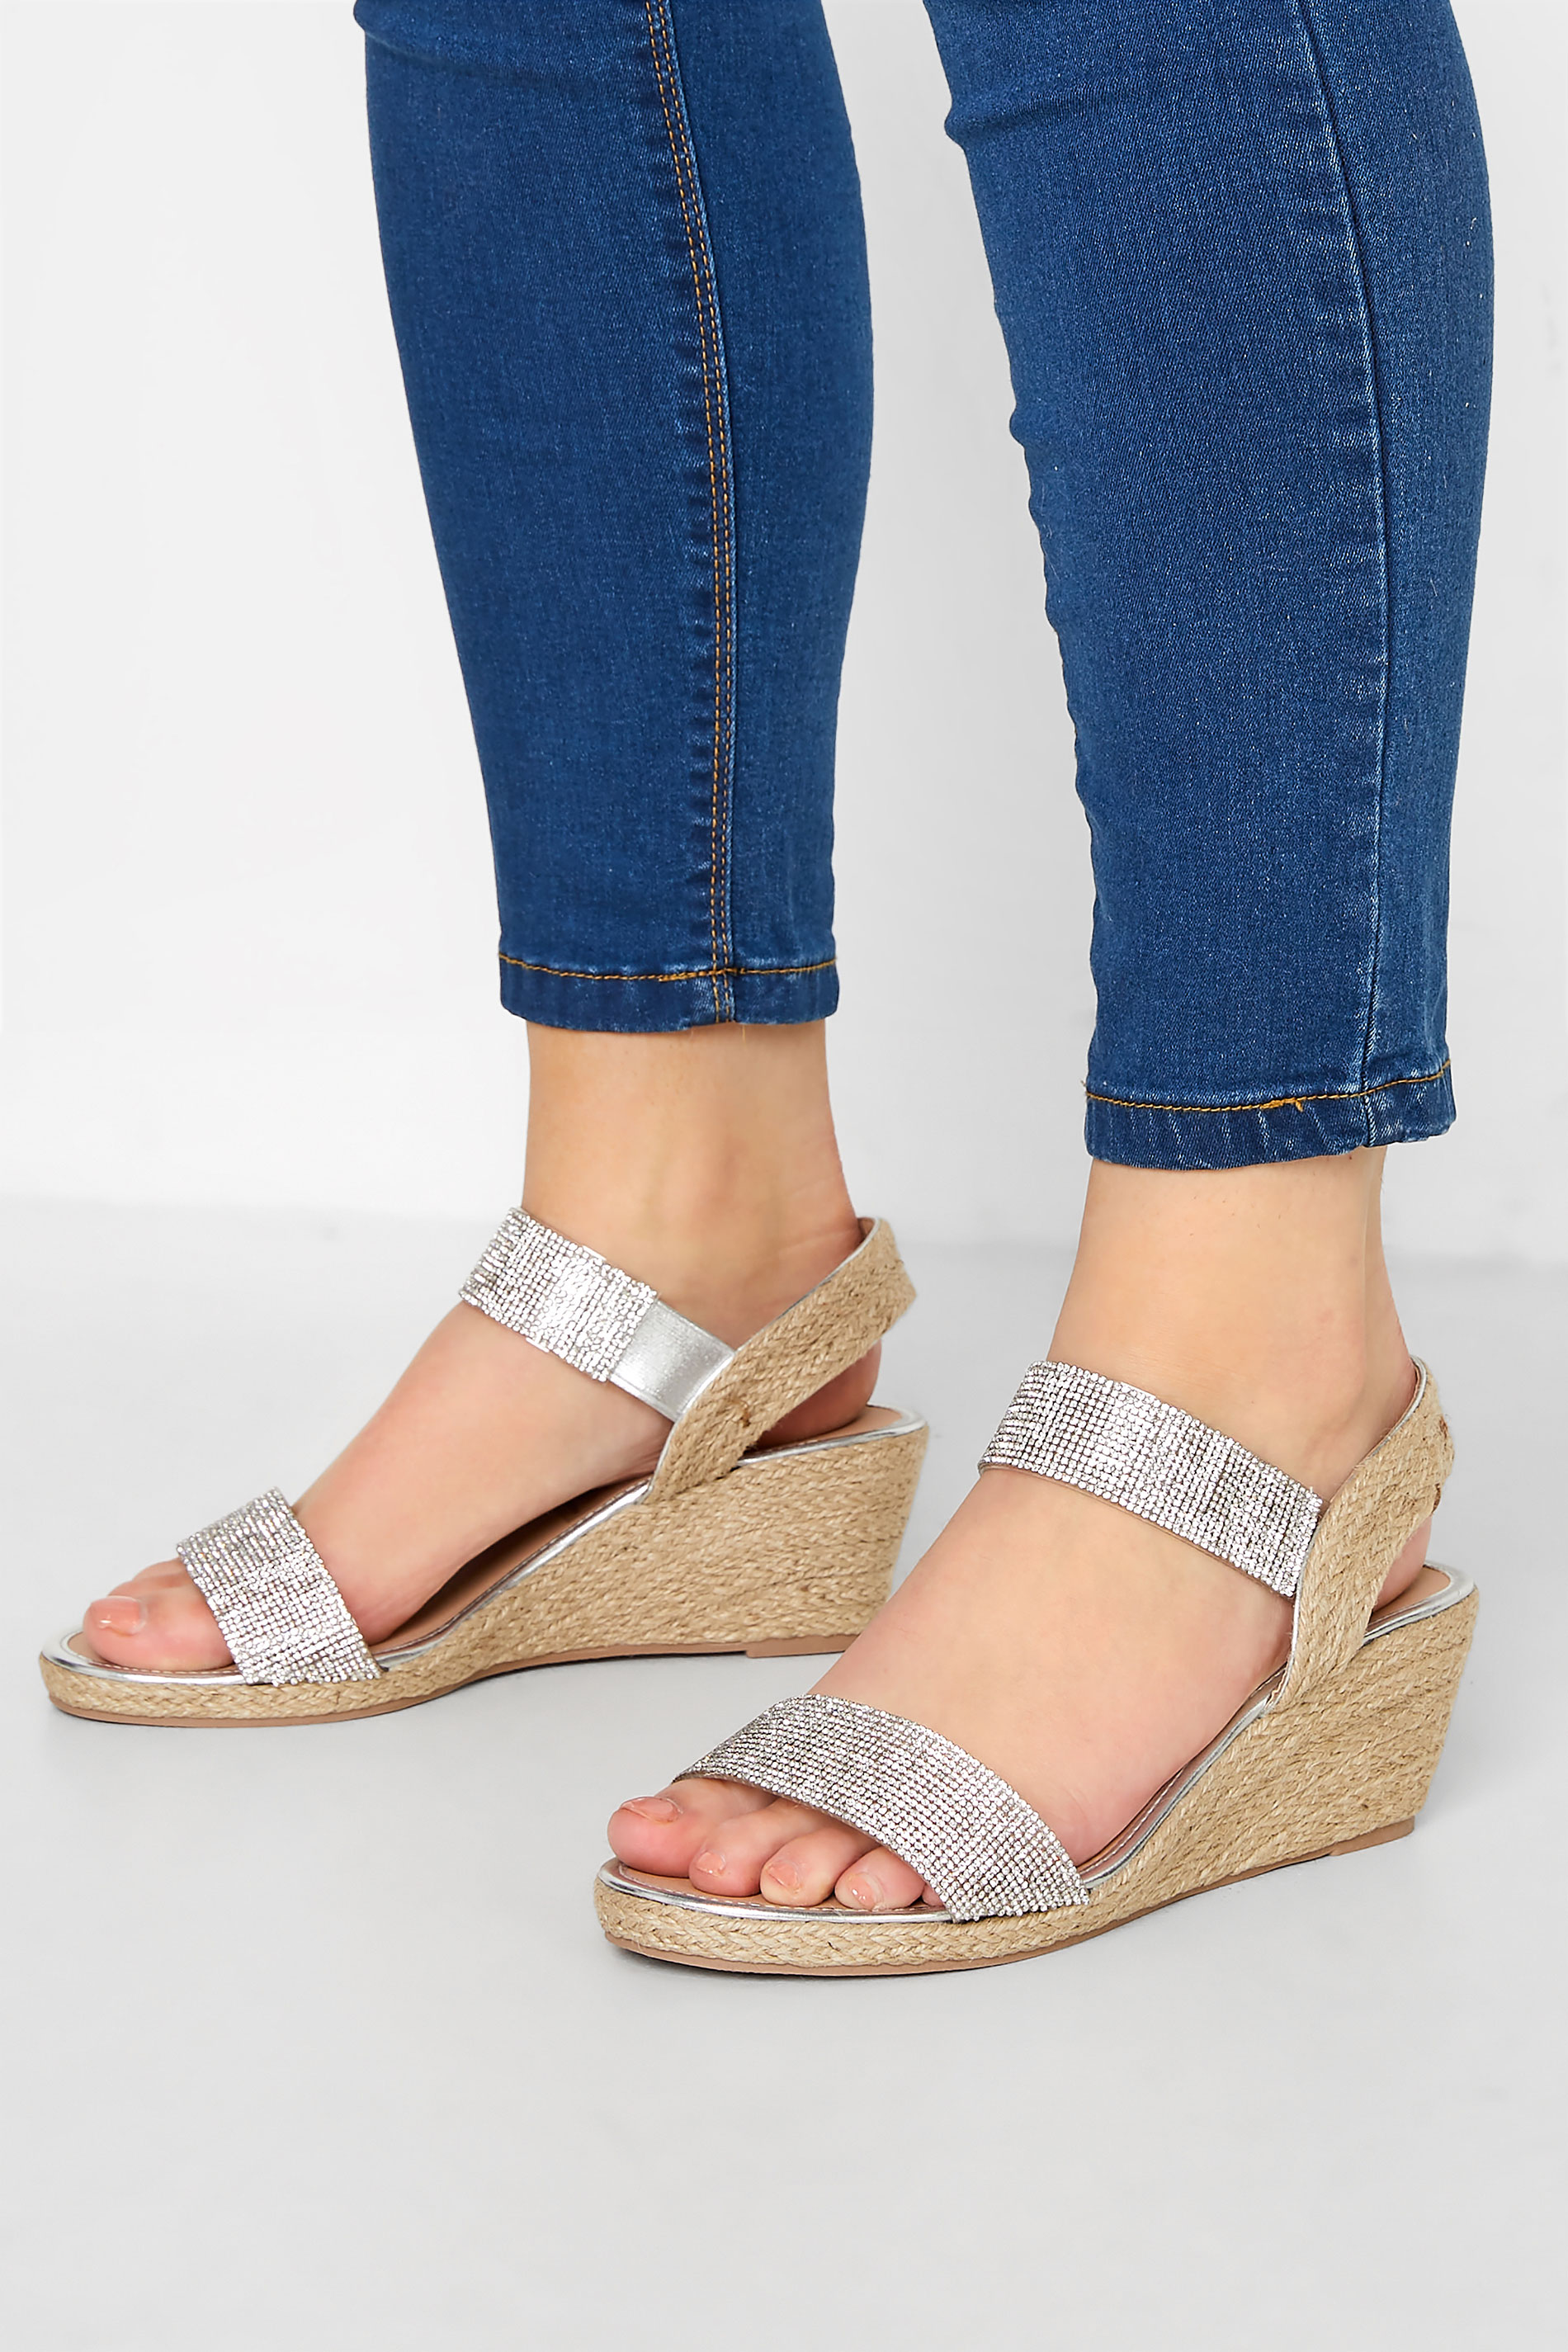 Chaussures Pieds Larges Chaussures compensées pieds larges | Espadrilles Argentées Compensées Pieds Extra Larges EEE - EG02235